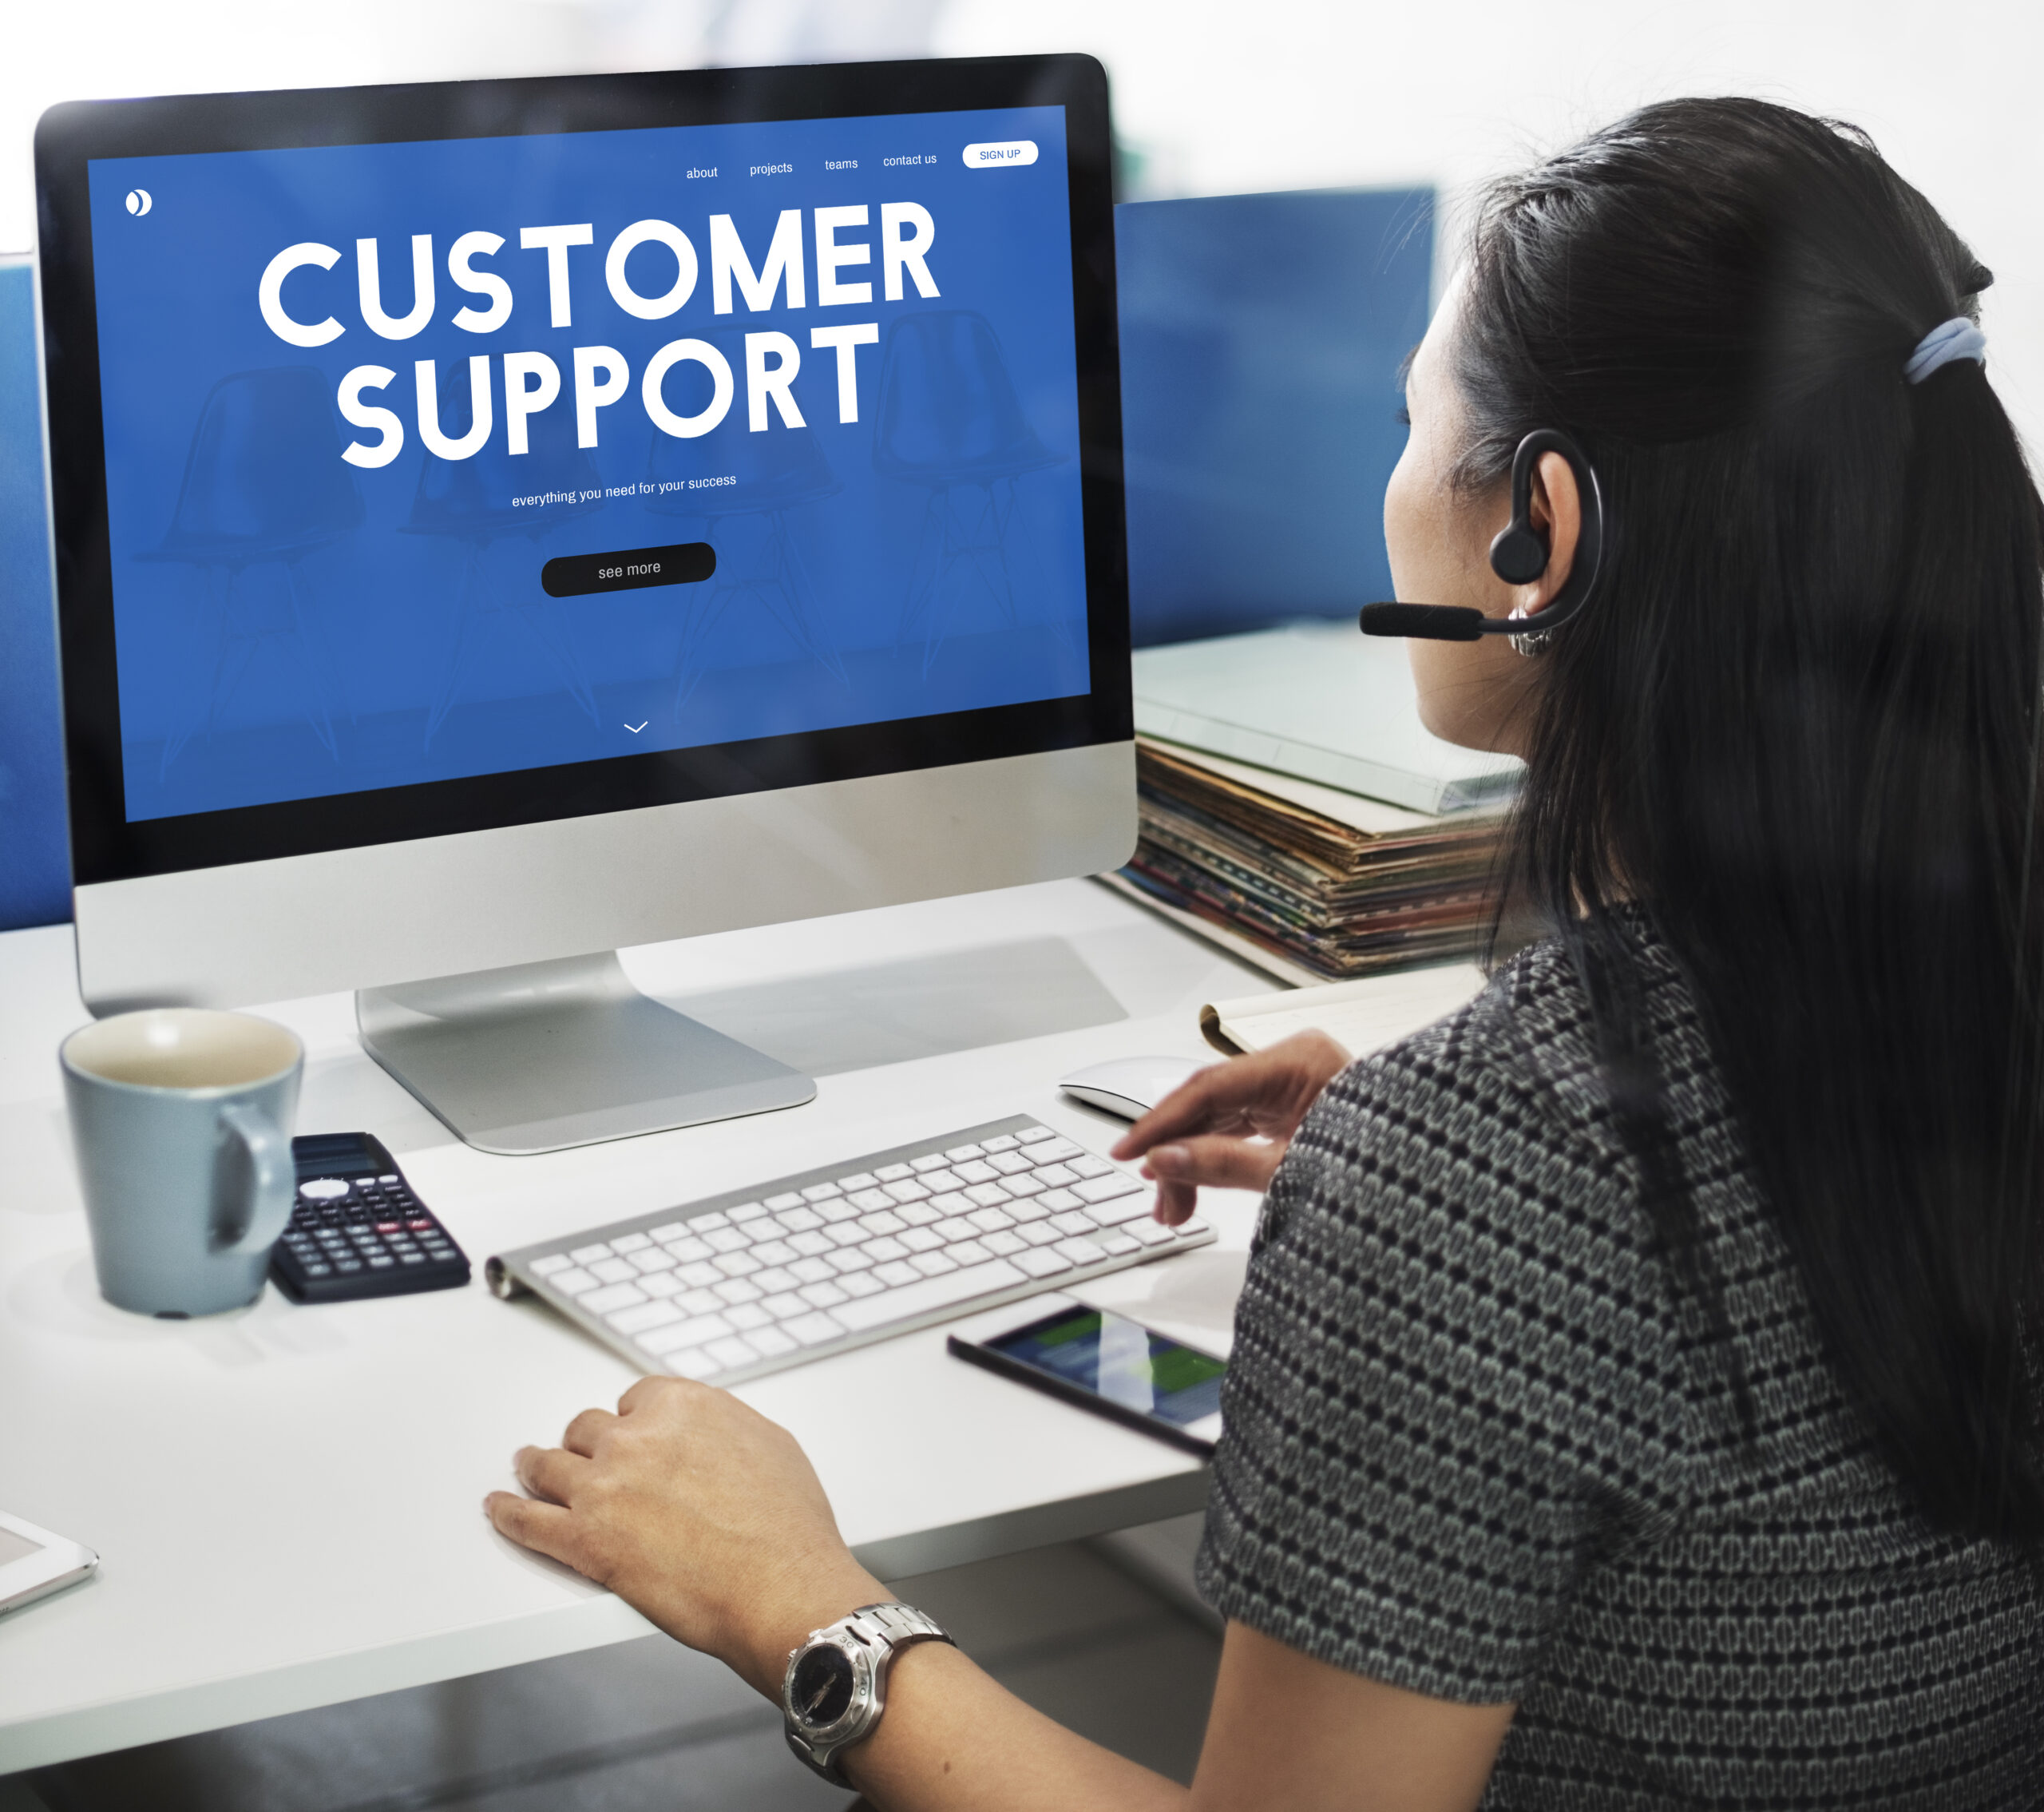 How to Deliver a Great Customer Experience with Helpdesk